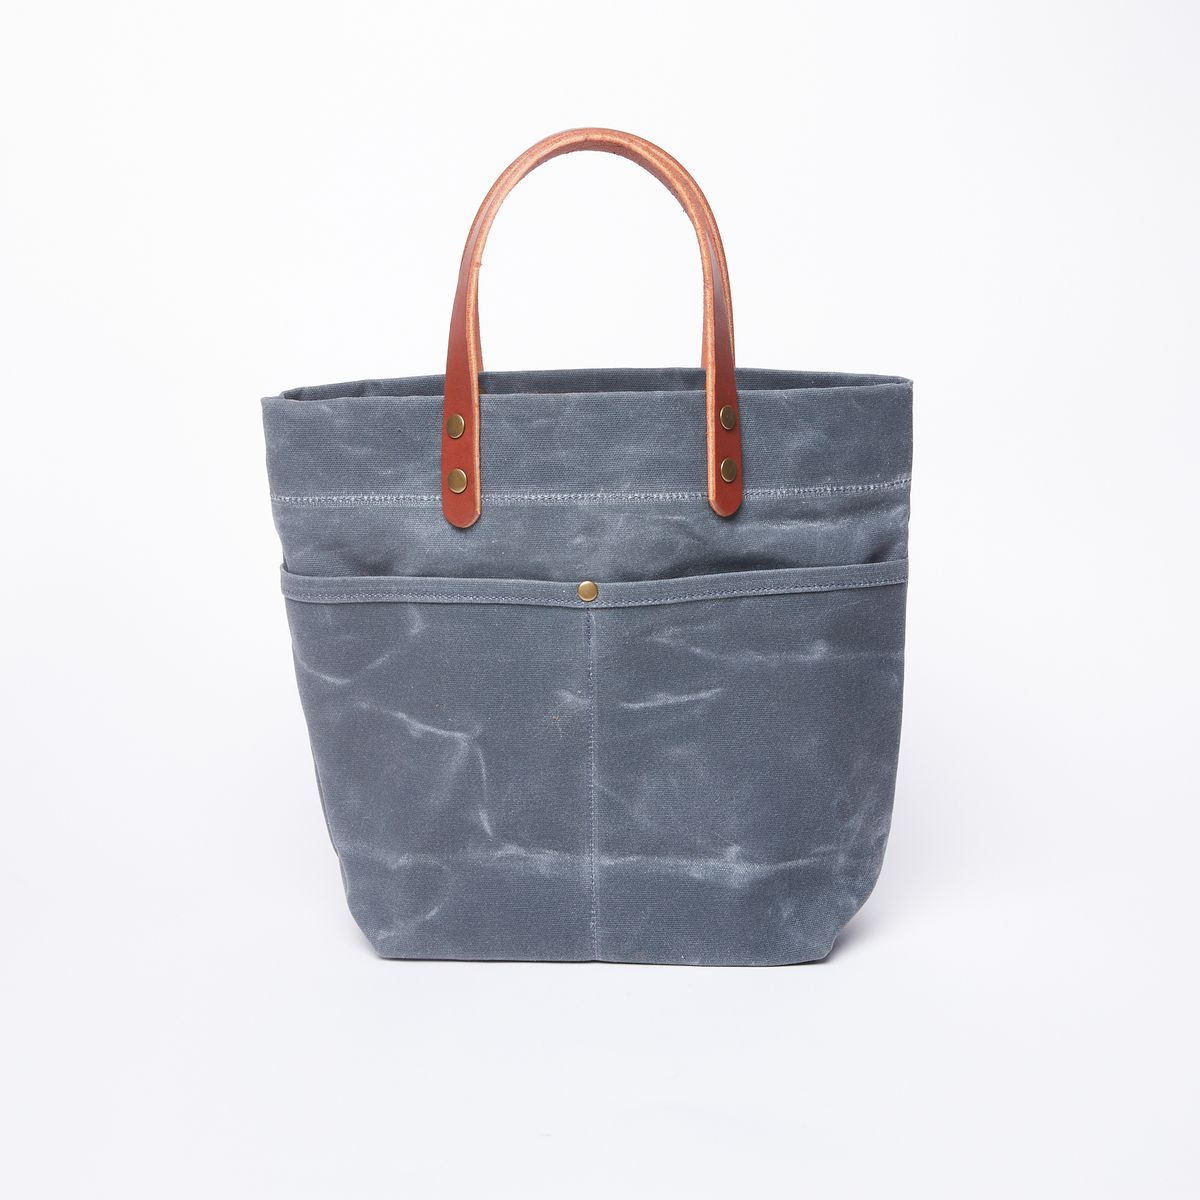 A blue grey waxed canvas bag with two external pockets separated by a rivet and a set of leather handles